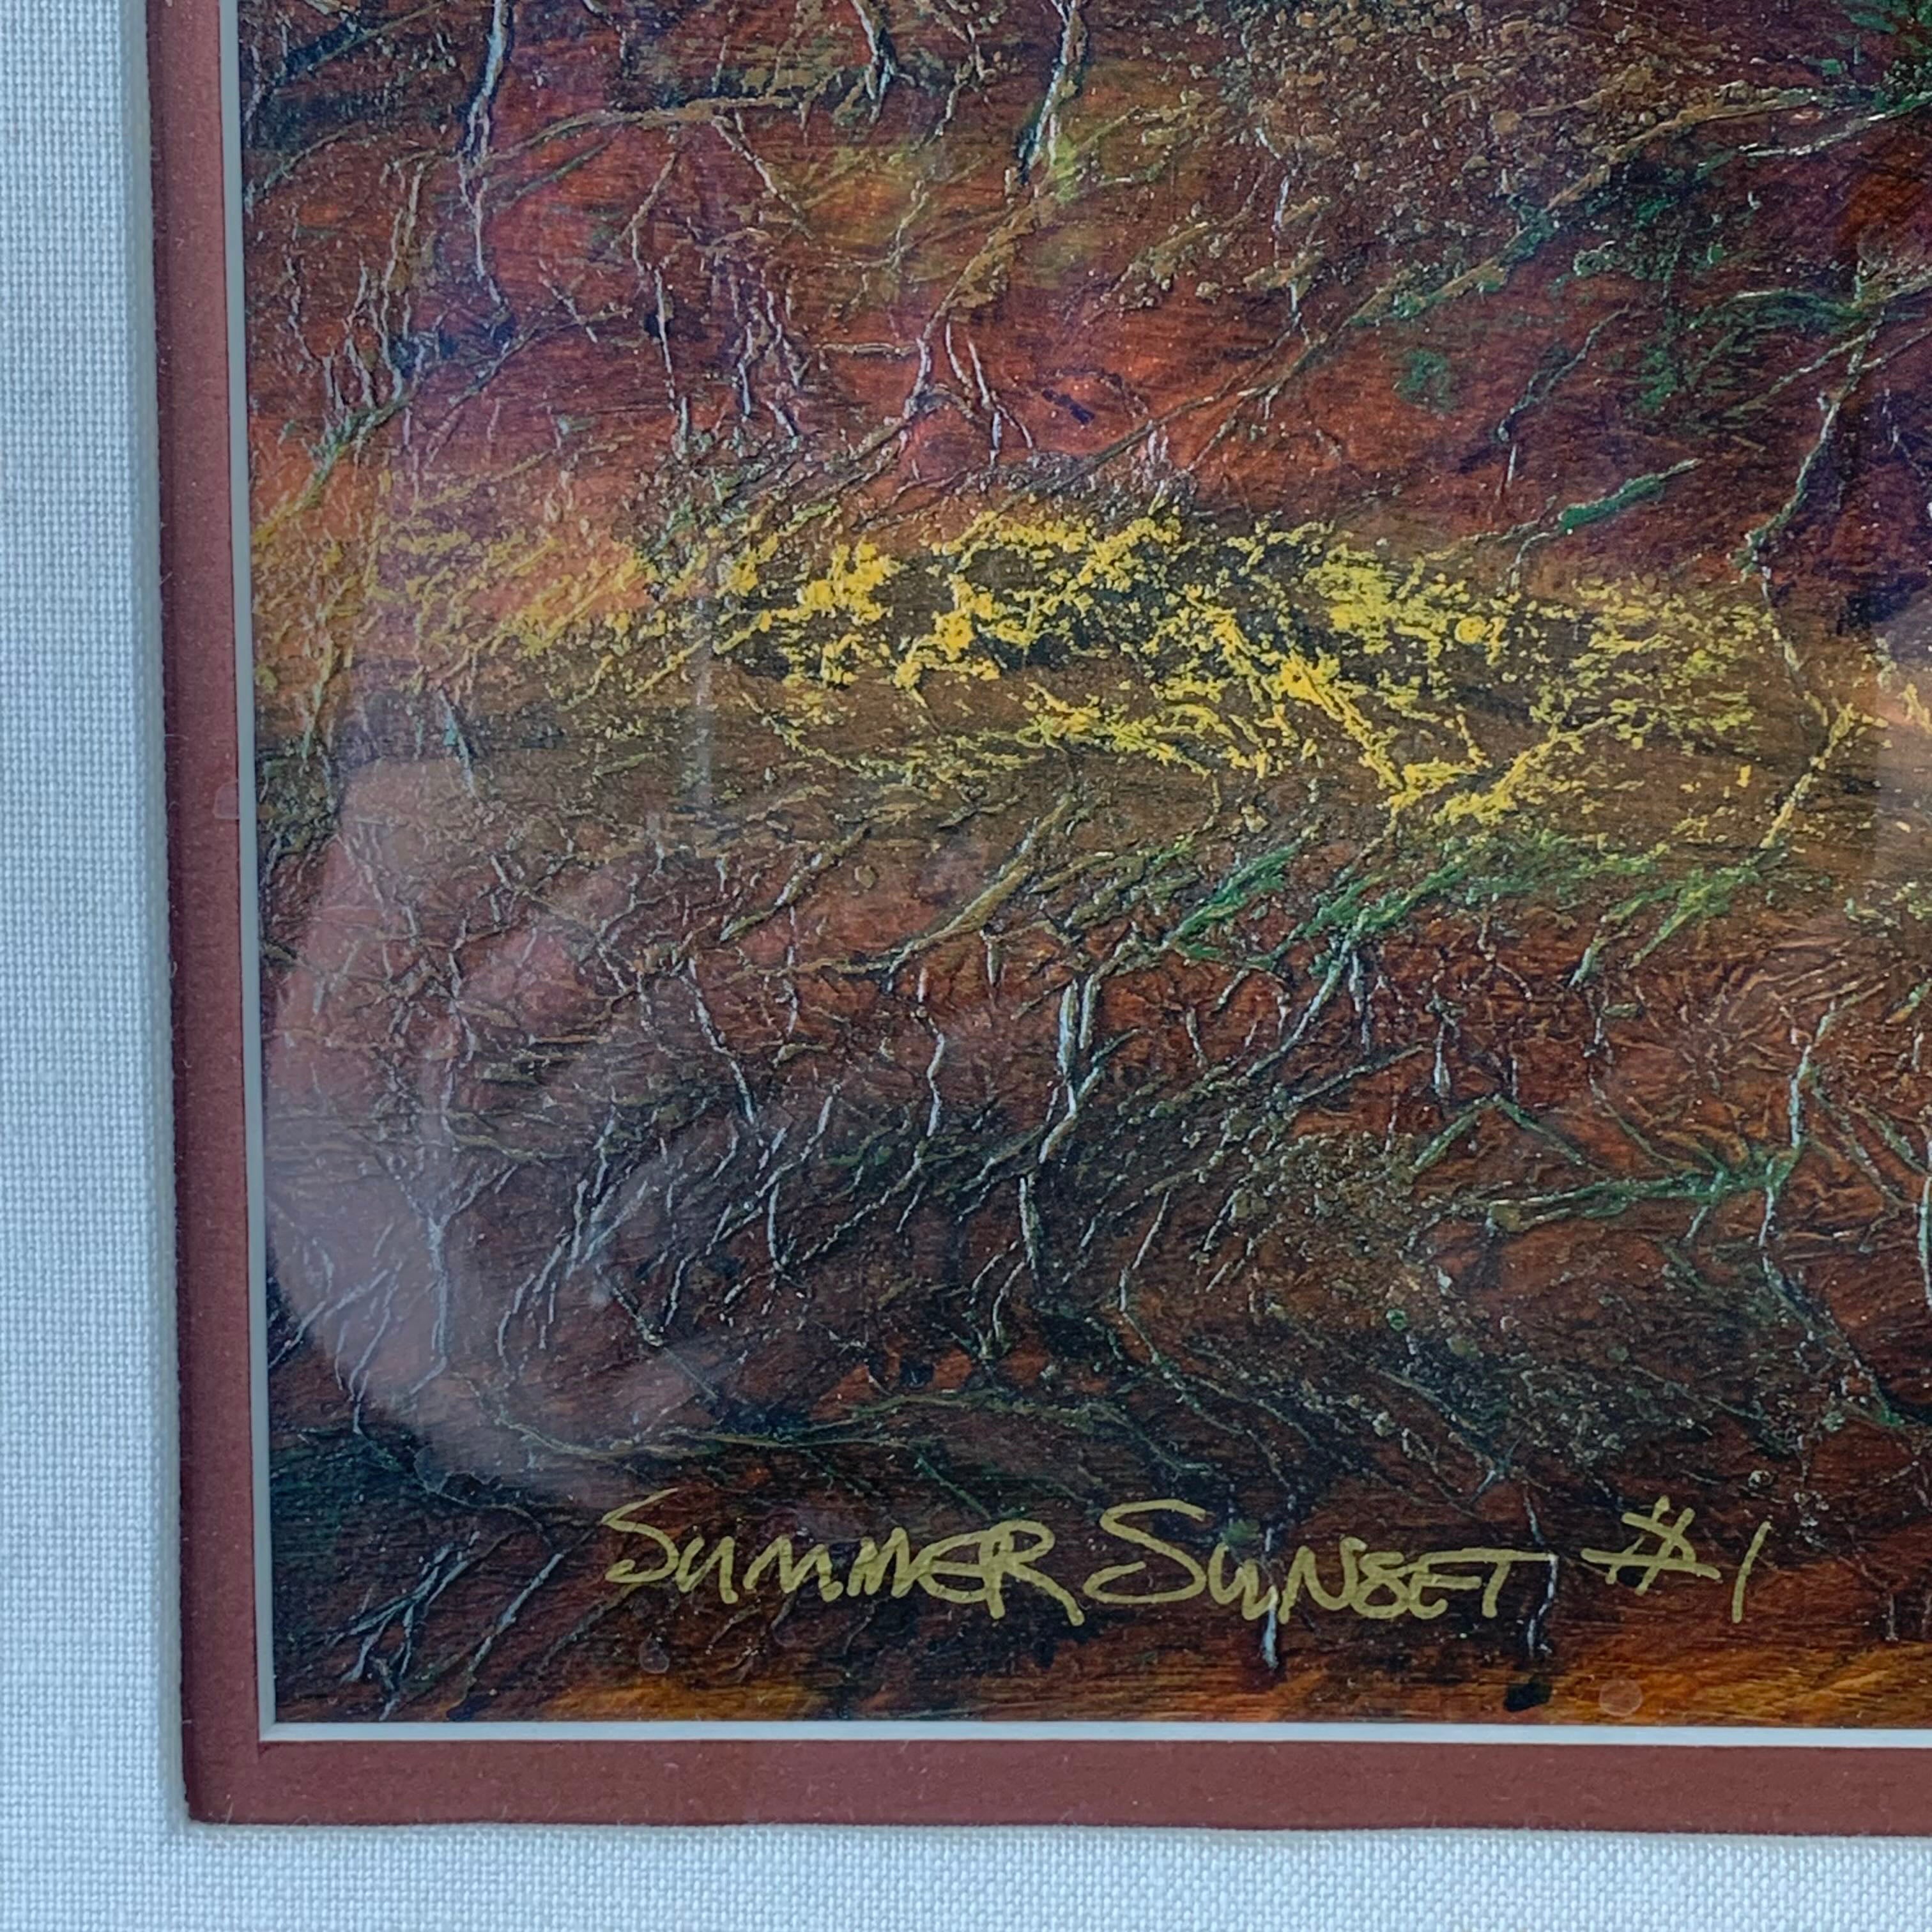 49.5"x 37.5" Summer Sunset #1 by R. Chapman Framed and Signed Embossed Print